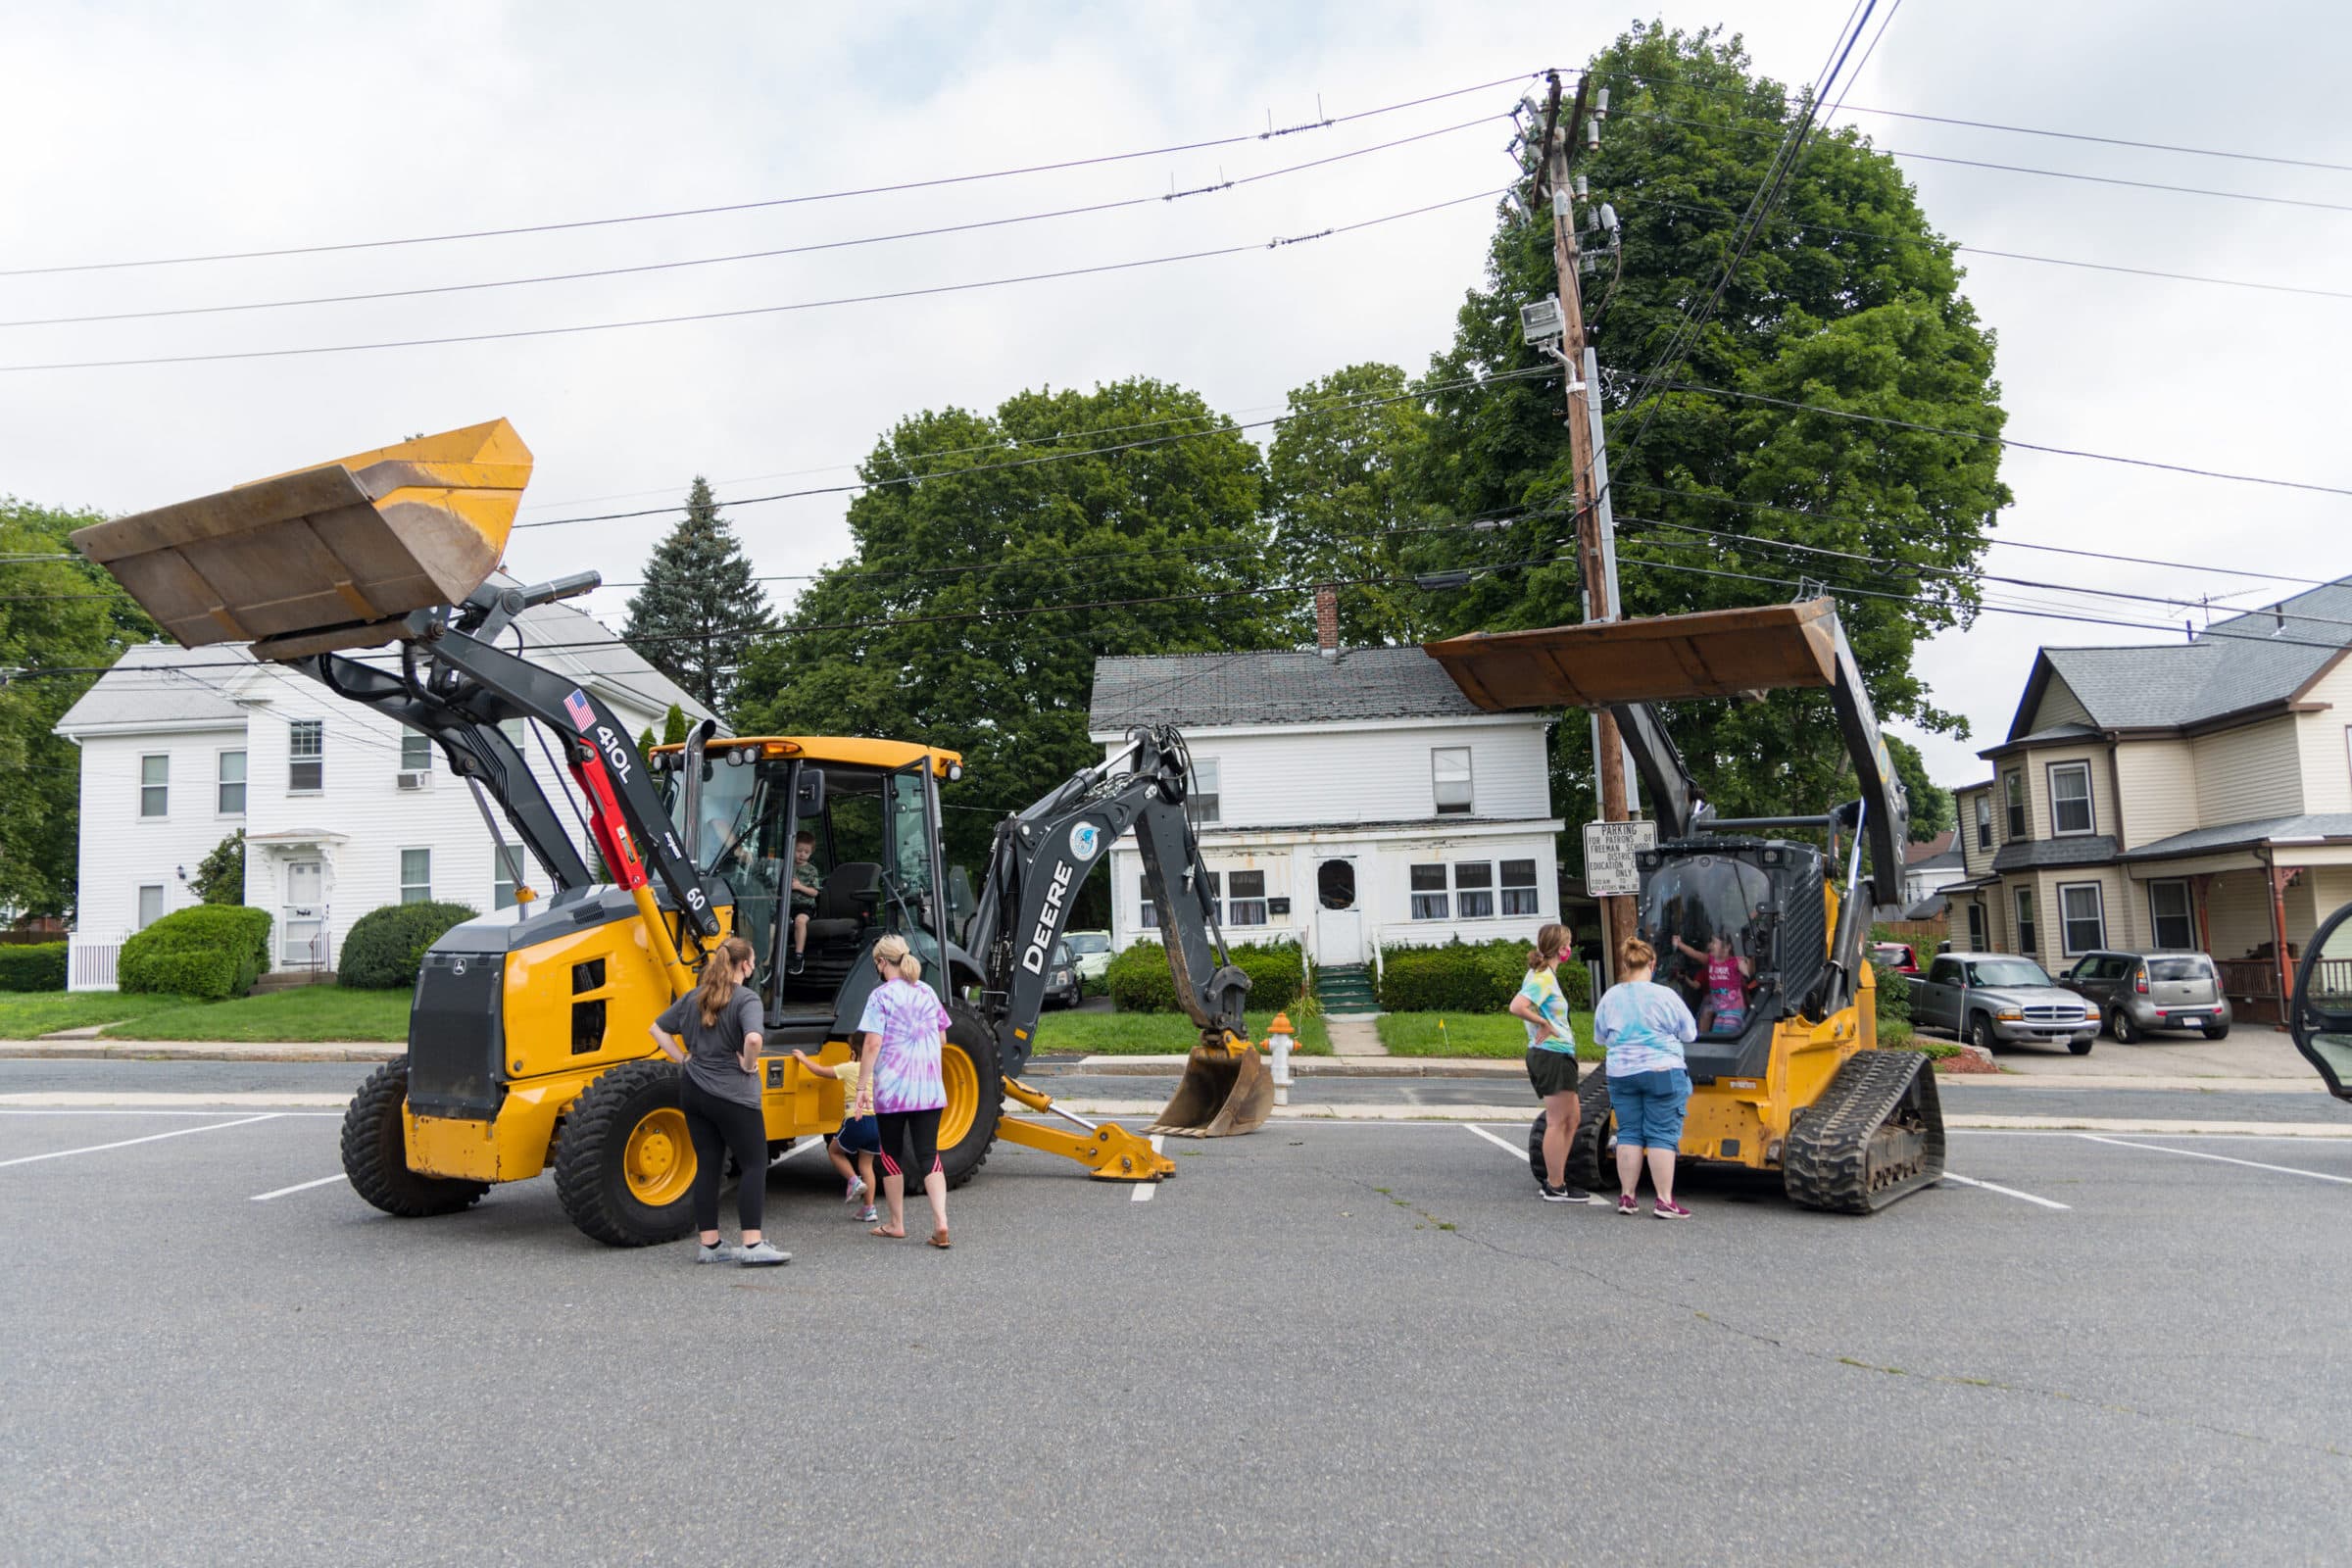 The Marlborough DPW brought a number of vehicles to the Early Childhood Center for a recent ‘touch-a-truck’ event. (Photo/Jesse Kucewicz)